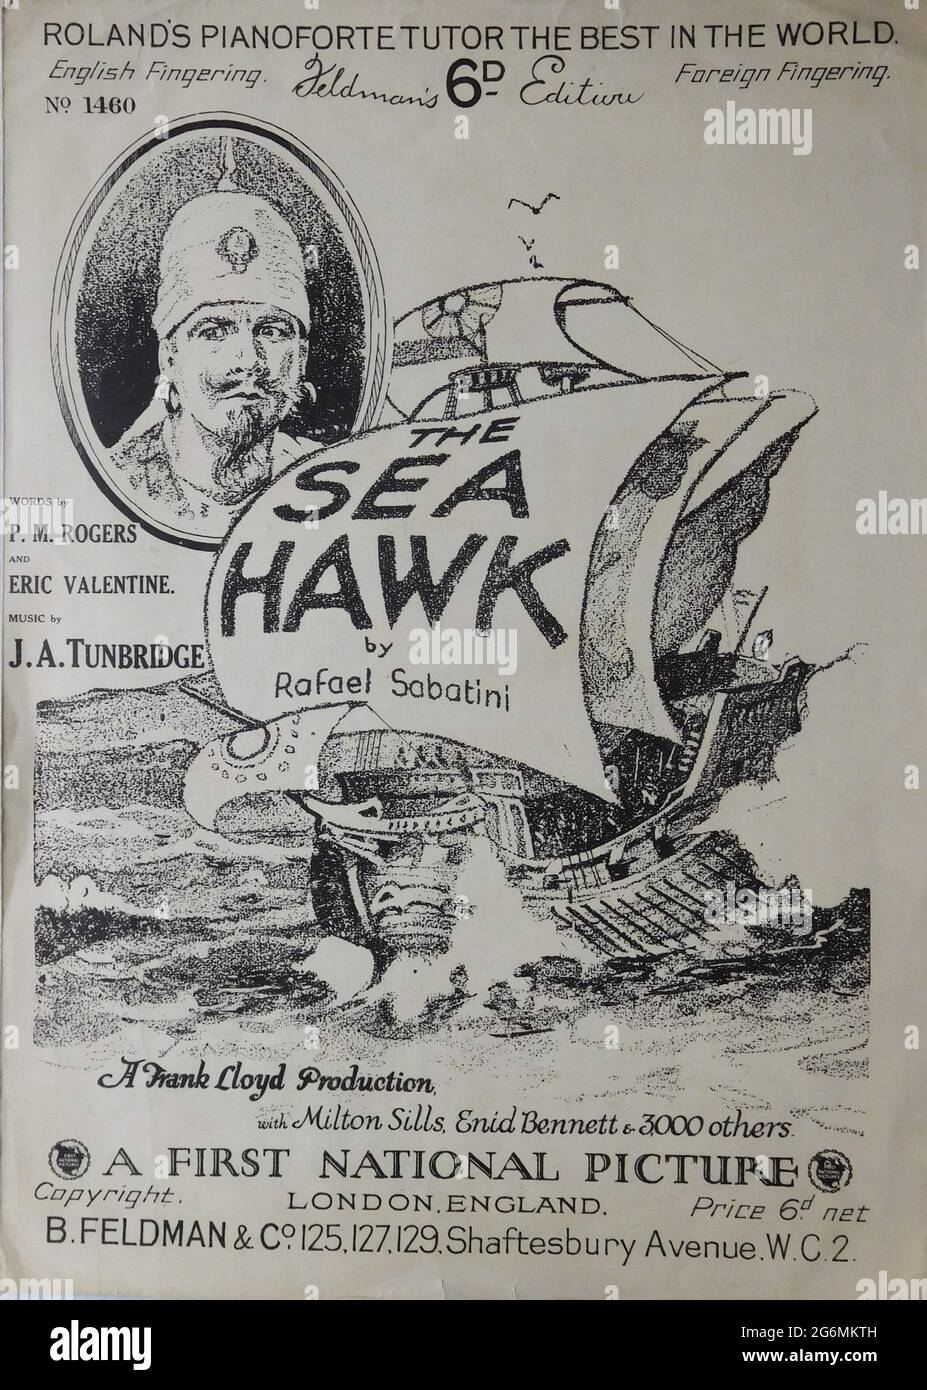 British Sheet Music Cover for MILTON SILLS in THE SEA HAWK 1924 director FRANK LLOYD novel Rafael Sabatini Frank Lloyd Productions / A First National Picture Stock Photo